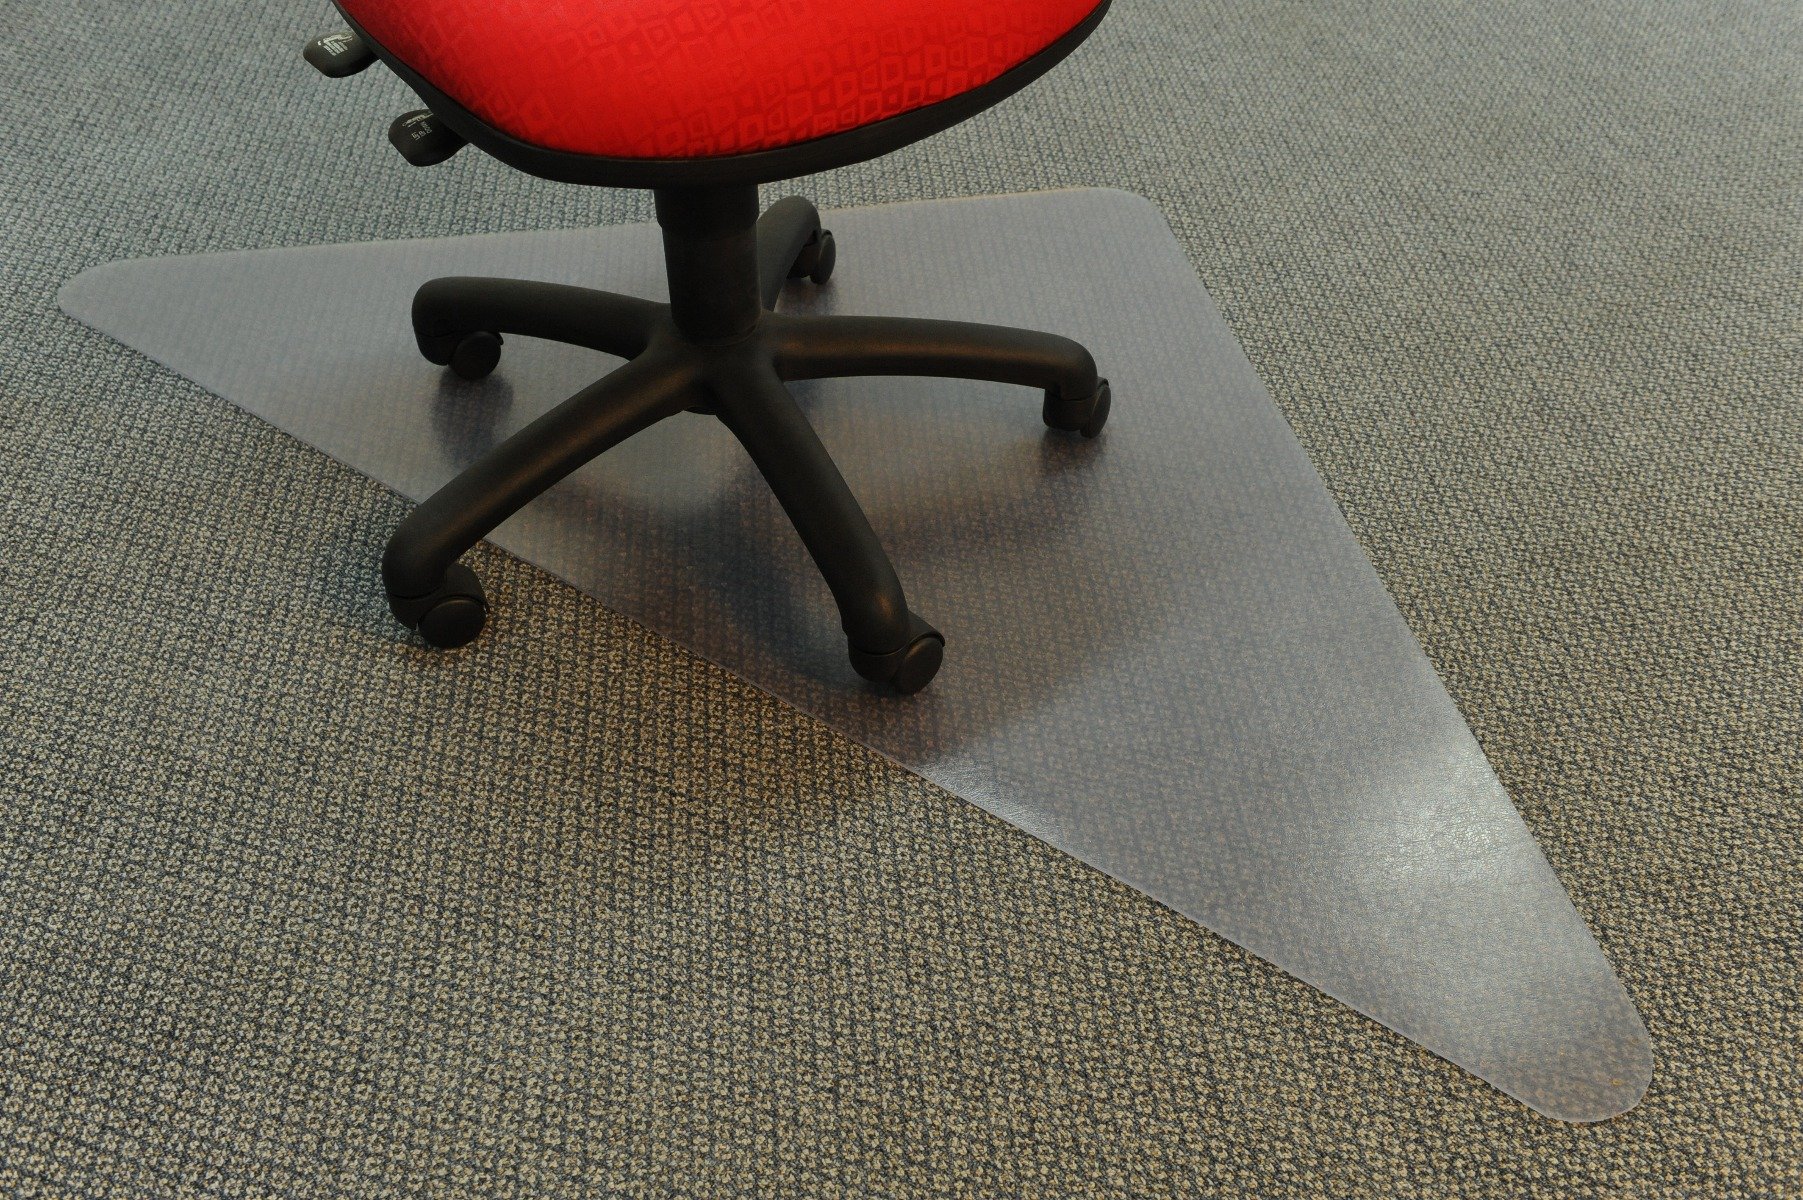 A red office chair with castors sits on top of a transparent chair mat for carpet.